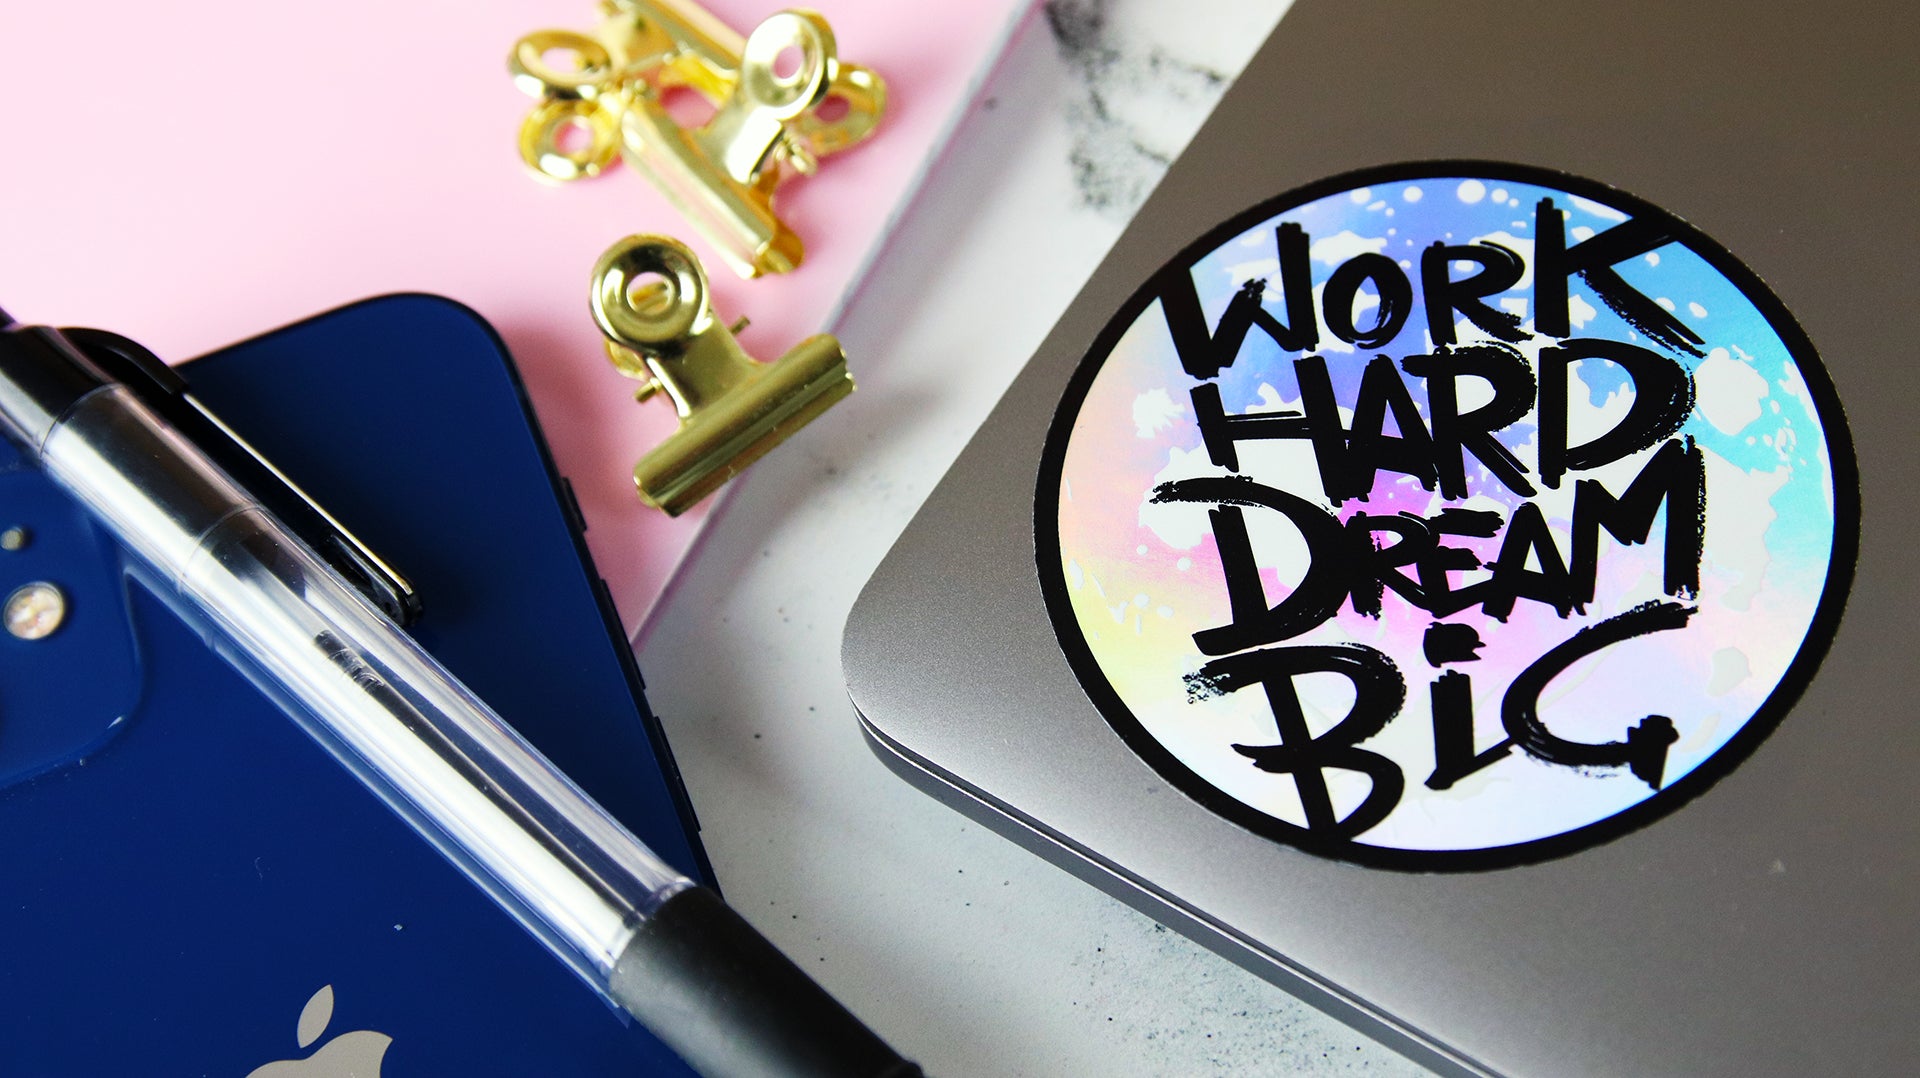 Circle holographic sticker with wirk hard dream big design applied to a laptop